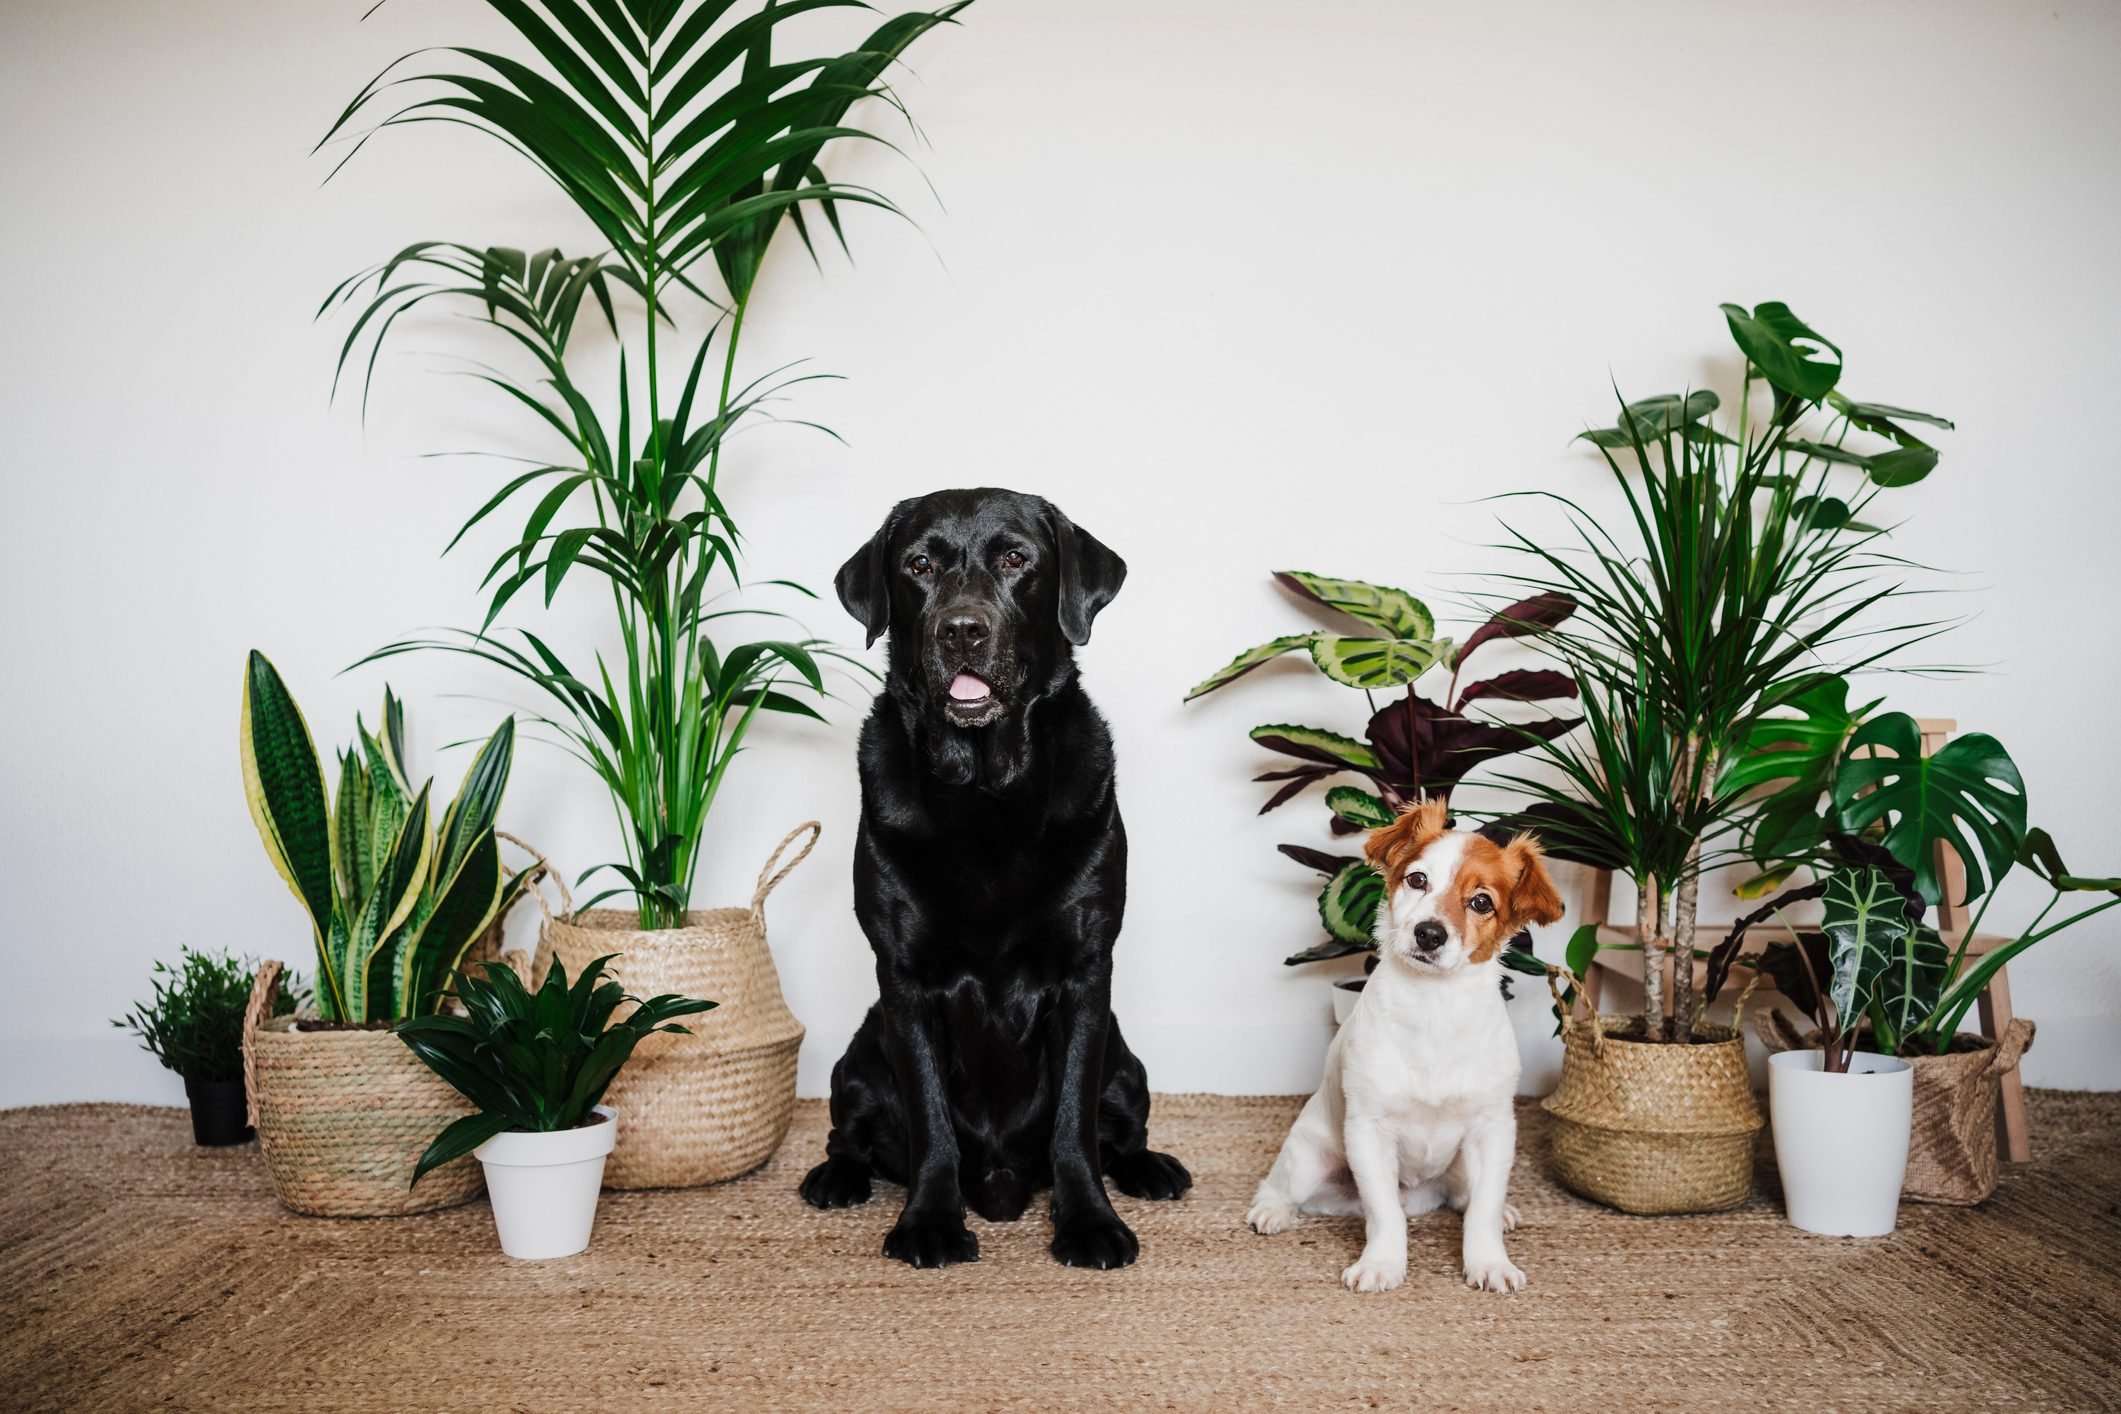 what plants are dangerous to dogs